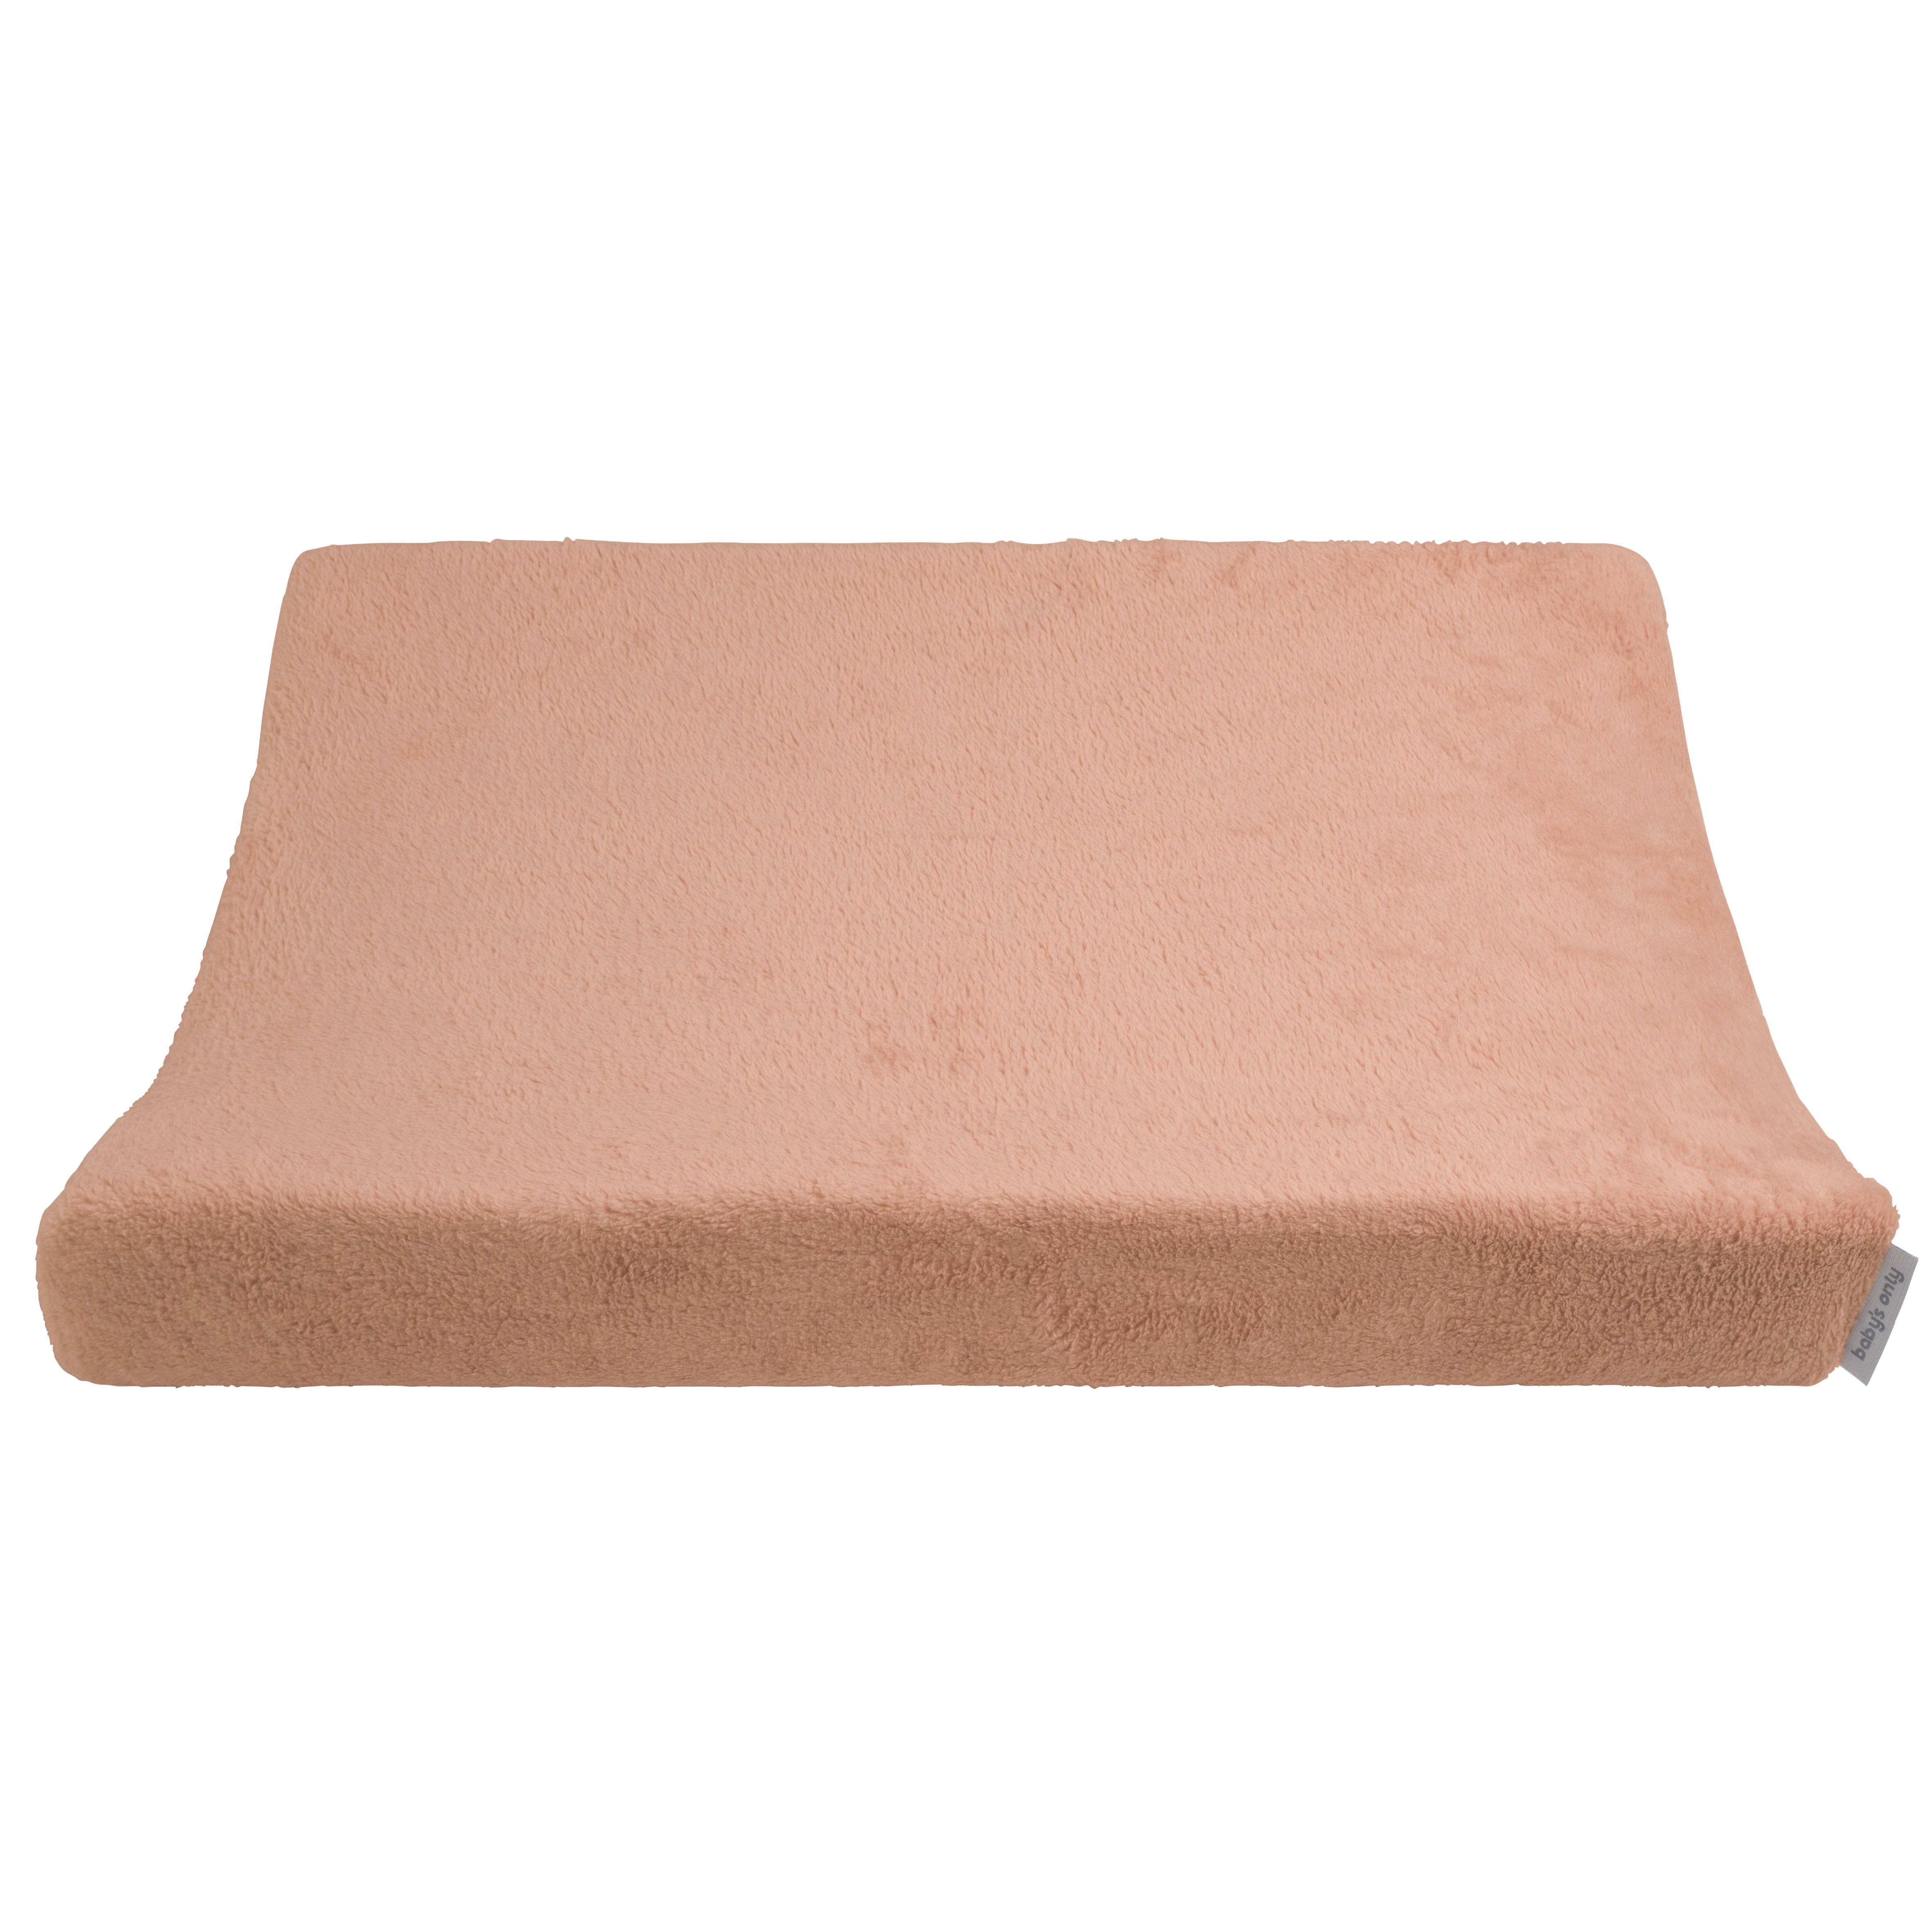 Changing pad cover Cozy tuscany - 45x70